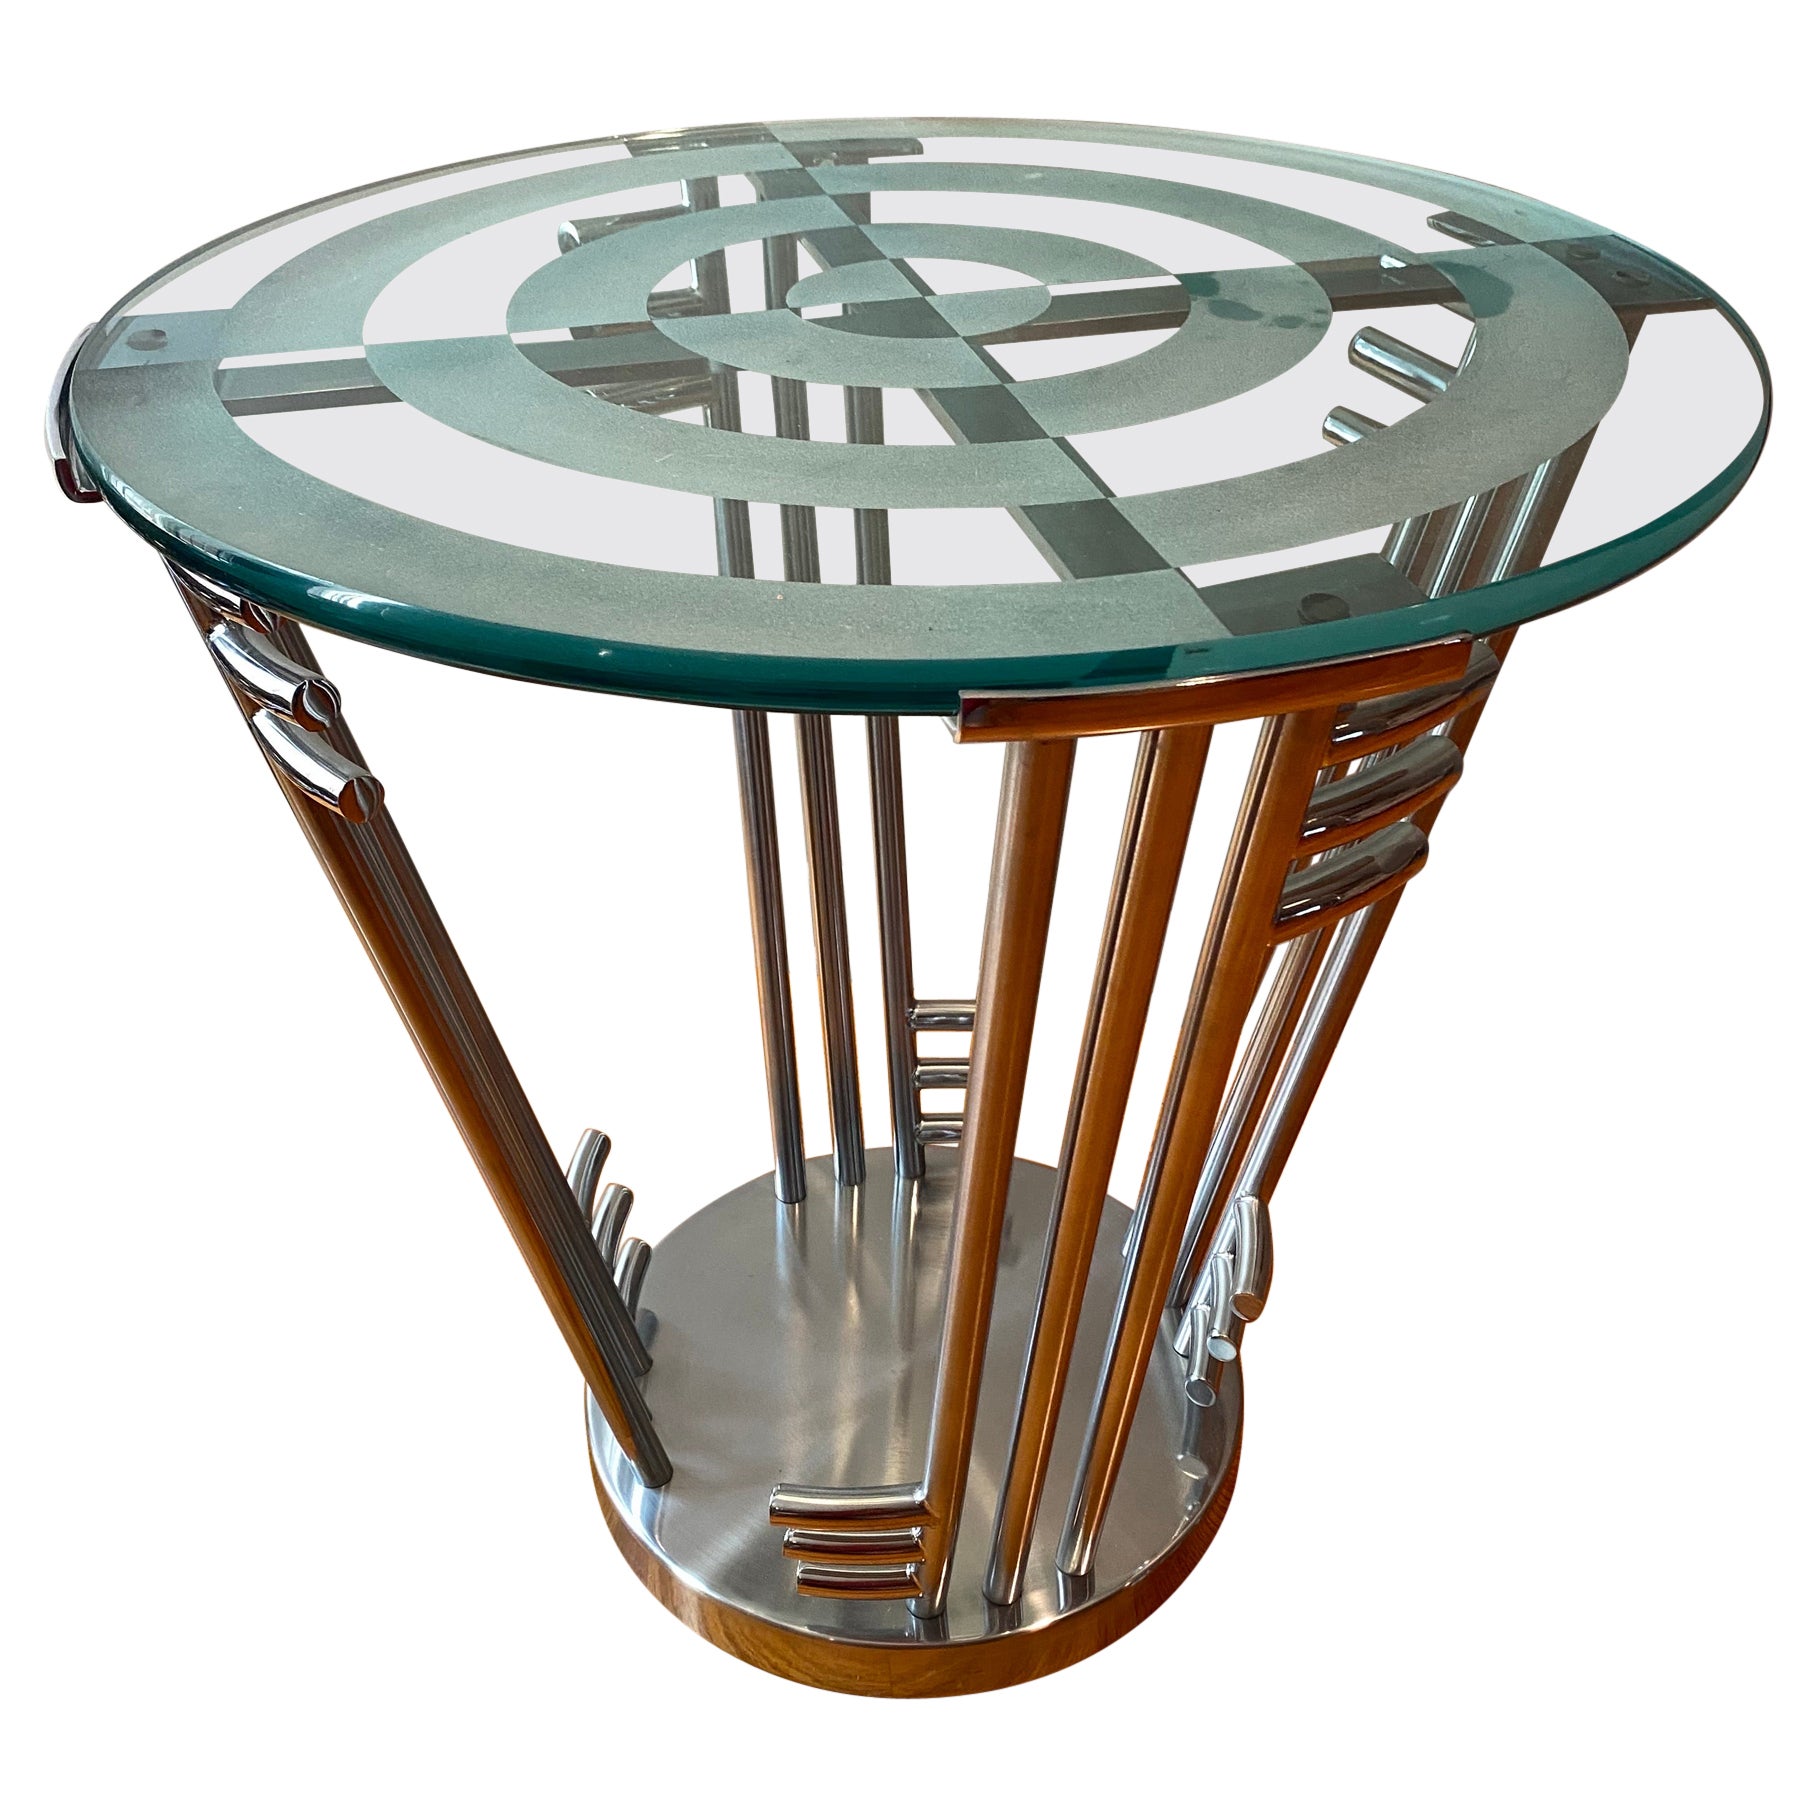 Jay Spectre "DeLanay" Round Chrome and Glass Table For Sale